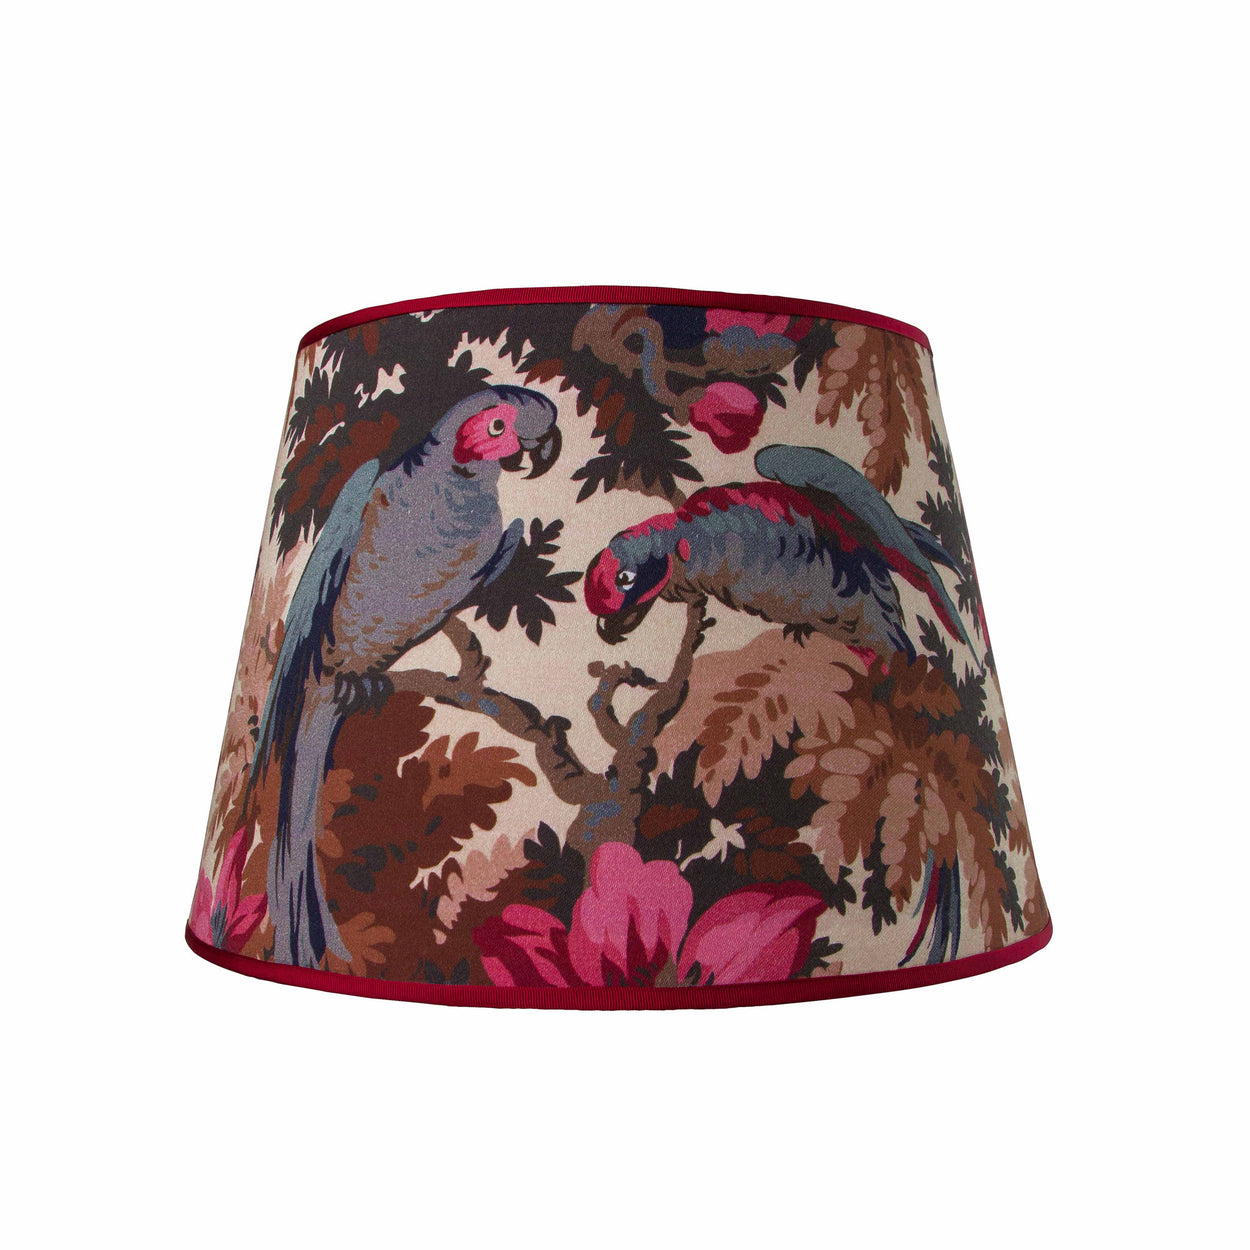 Jungle parrots lampshade by Mary Jane McCarty